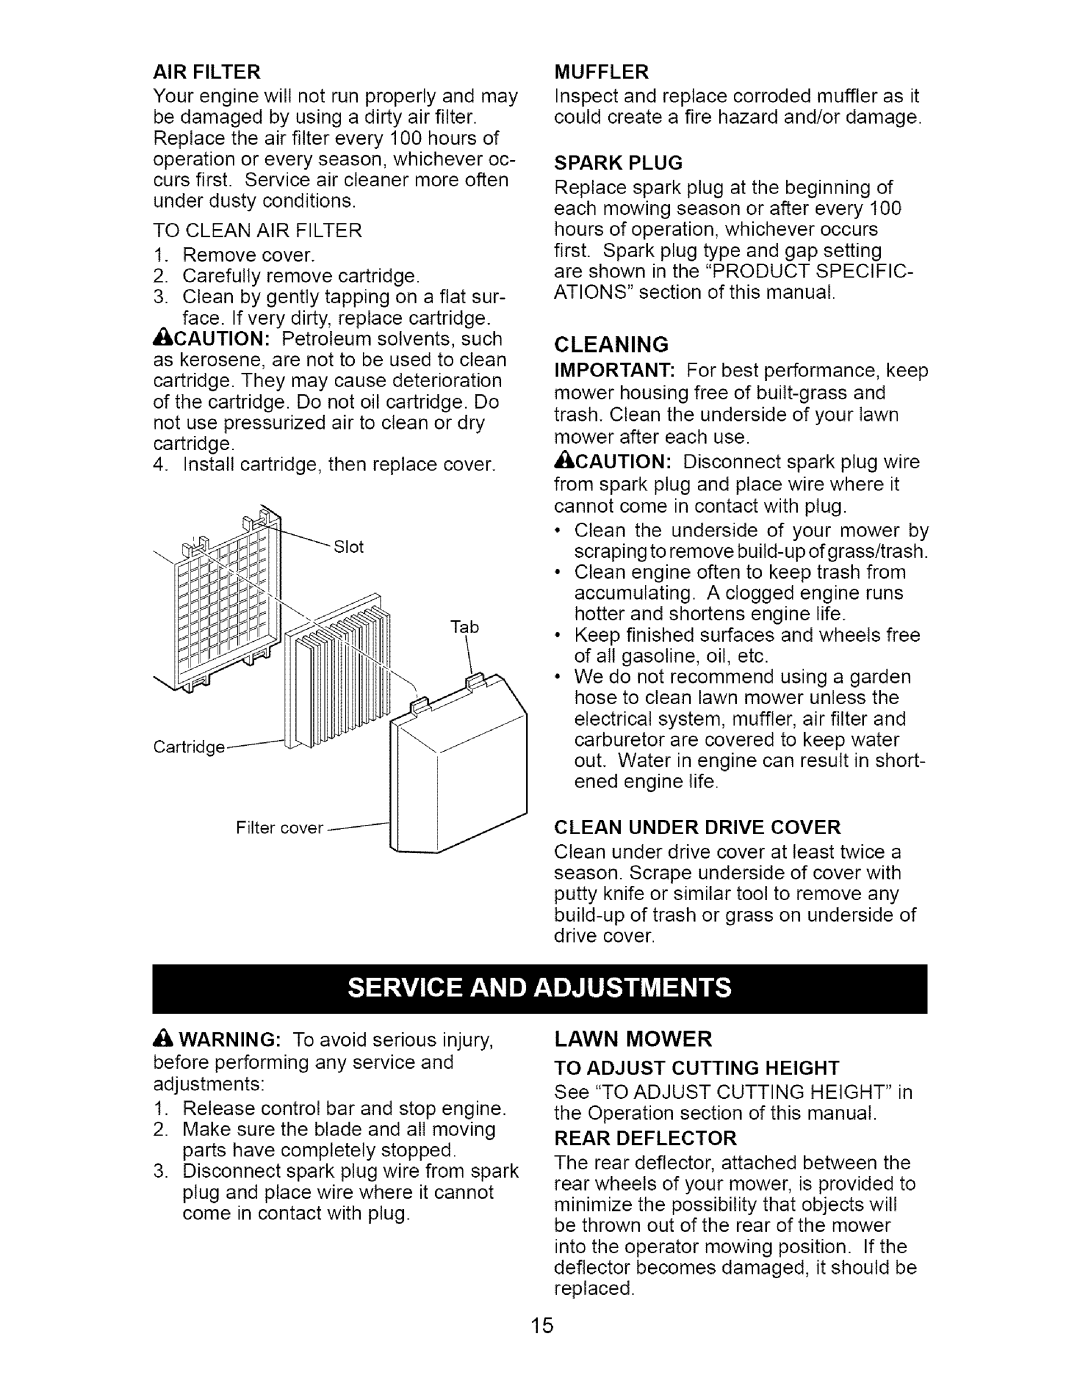 Craftsman 917.371721 owner manual Air Filter, Muffler, Spark Plug, Cleaning, Lawn Mower To Adjust Cutting Height 